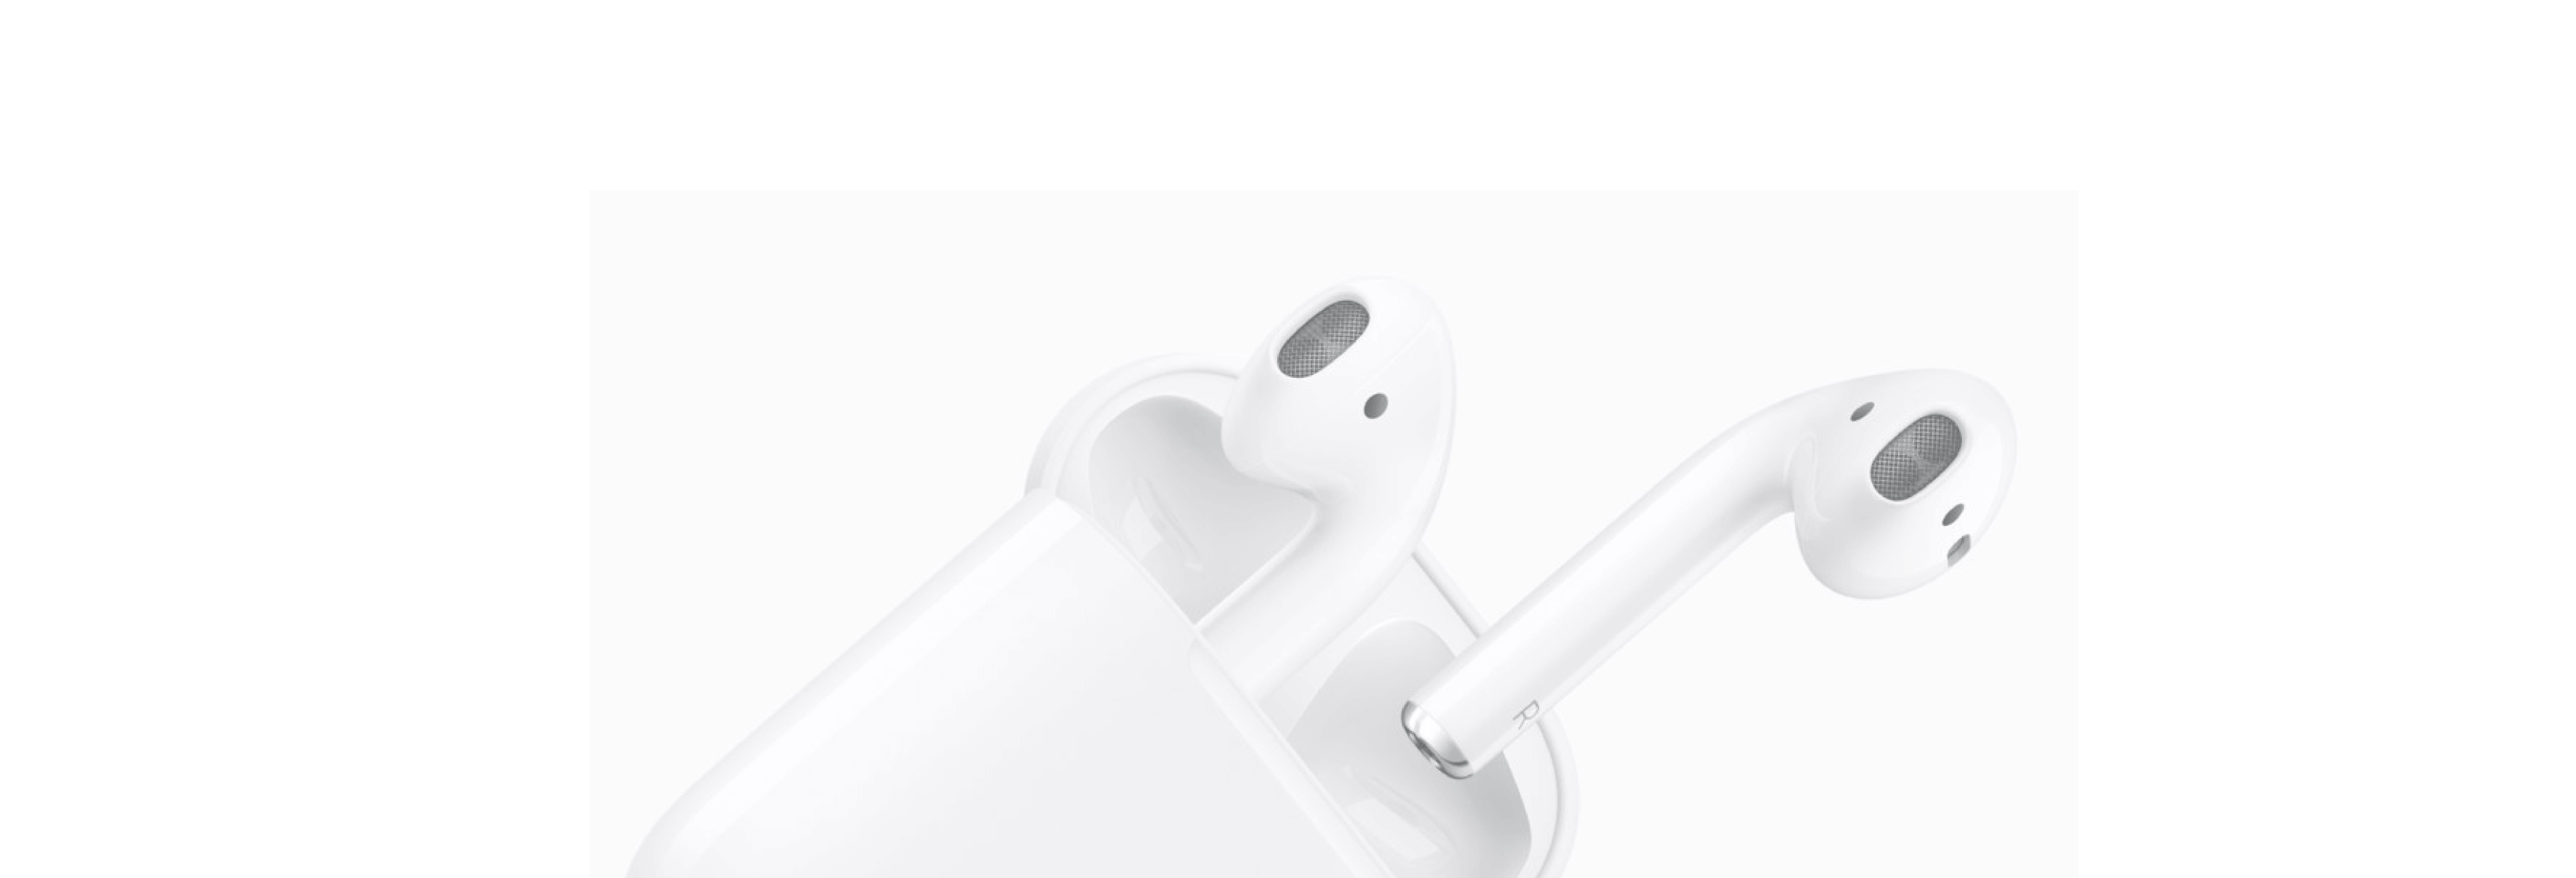 How to make your AirPods and iPhone into a Live Listening system in iOS 12